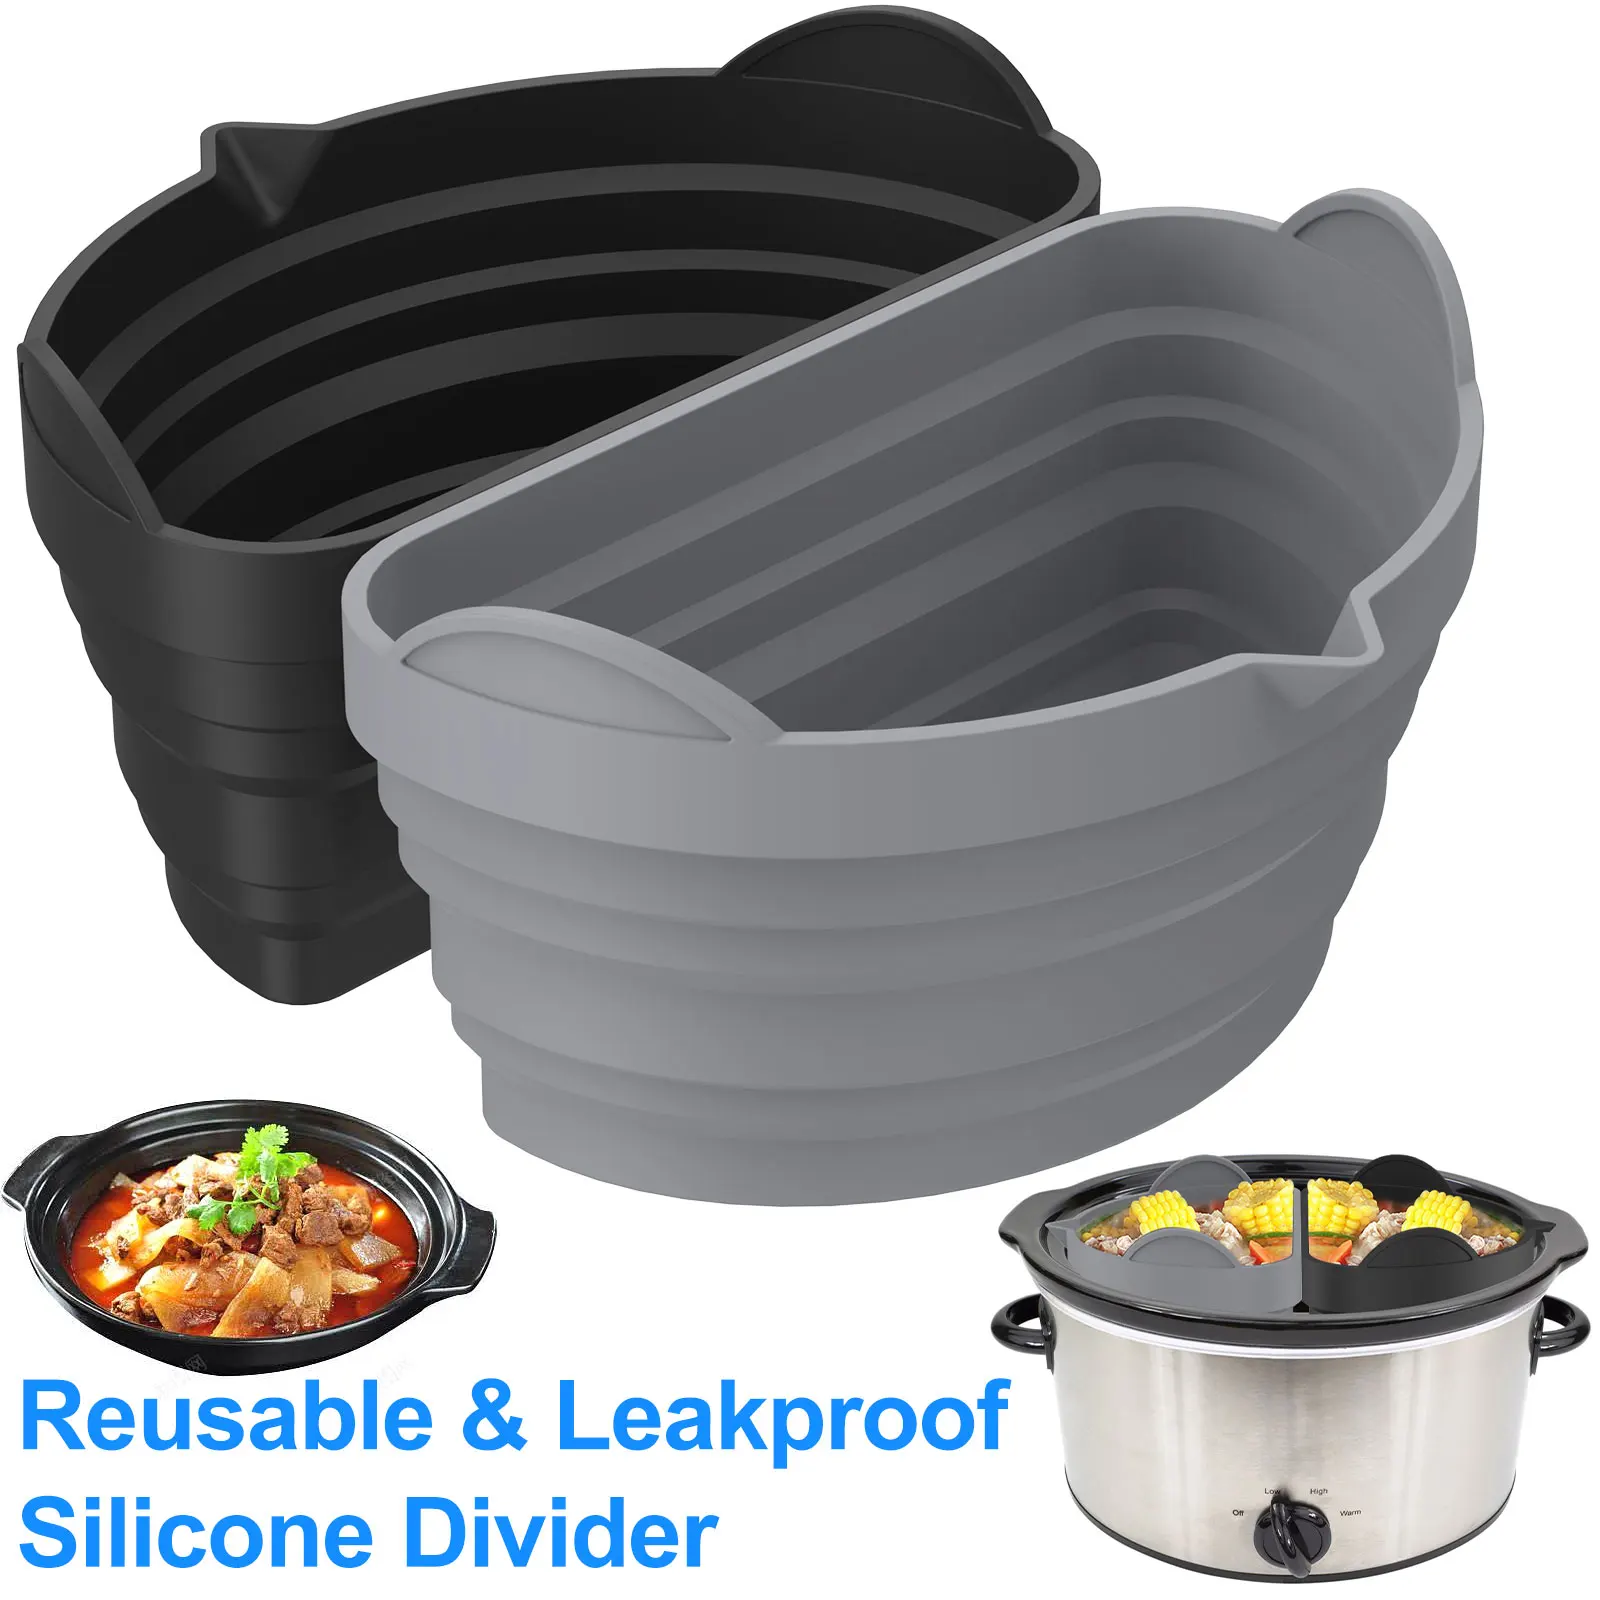 NEW]KOOC Premium Slow Cooker Liners and Cooking Bags, Large Size